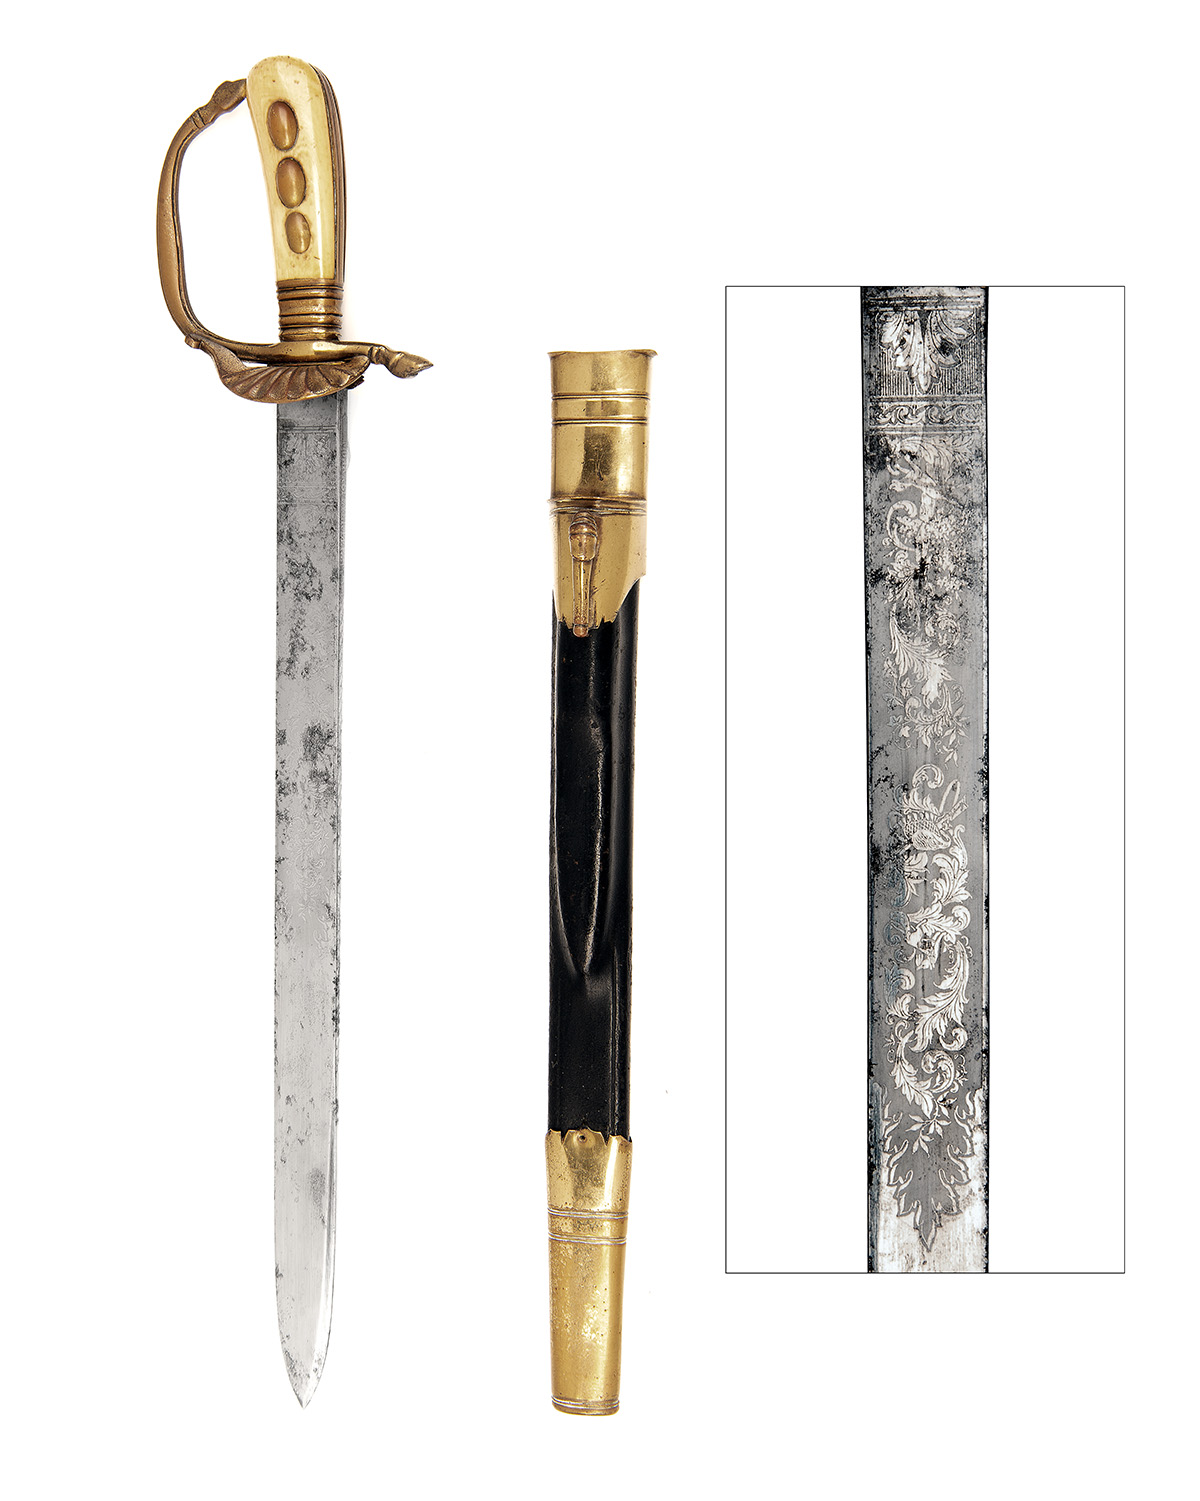 AN IMPERIAL GERMAN PERIOD HUNTING CUTLASS, UNSIGNED, a 'D' guard long cutlass from the Imperial